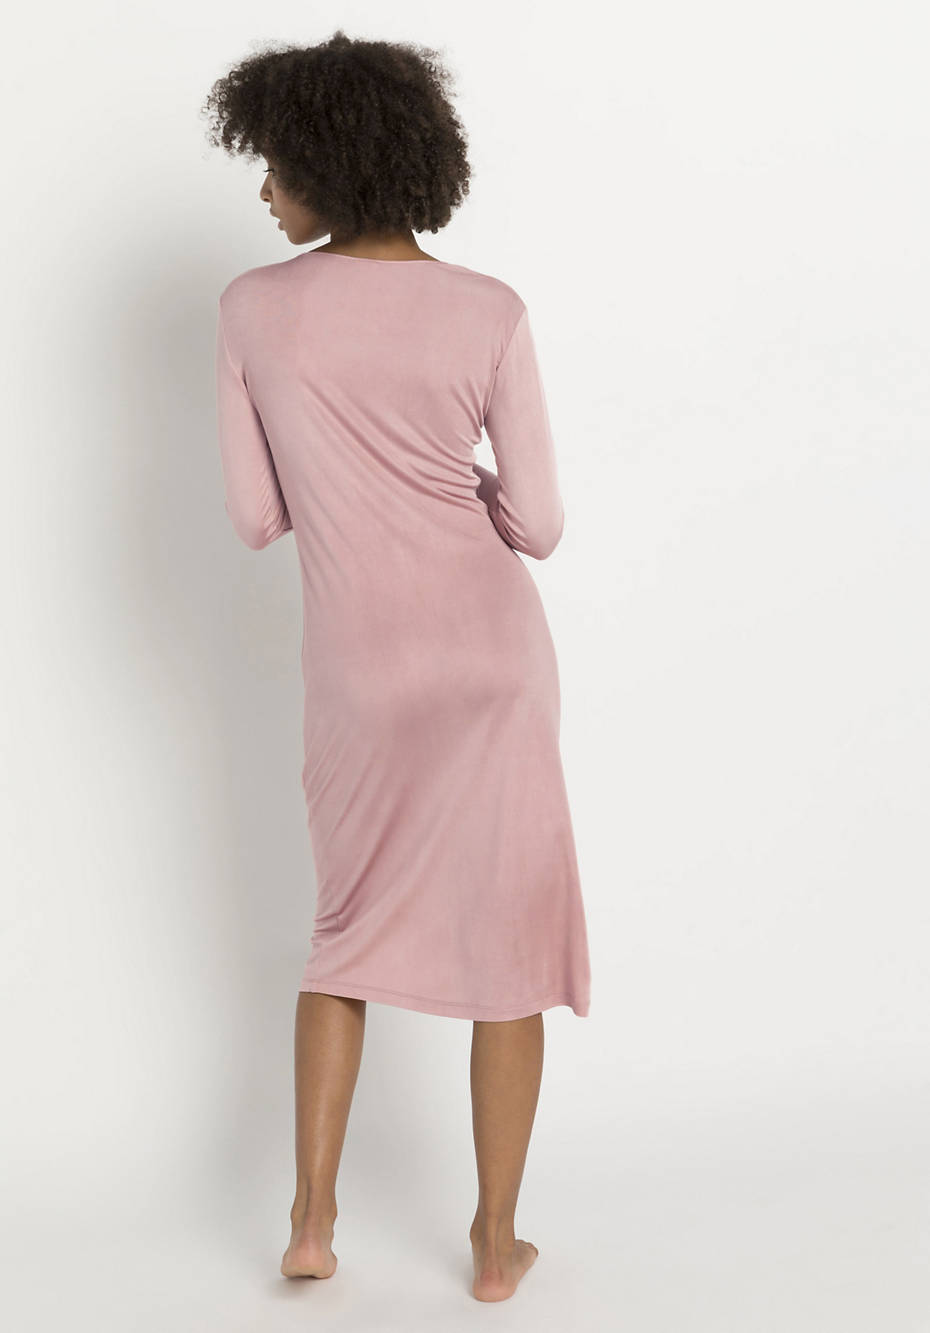 Long-sleeved nightgown made of pure silk